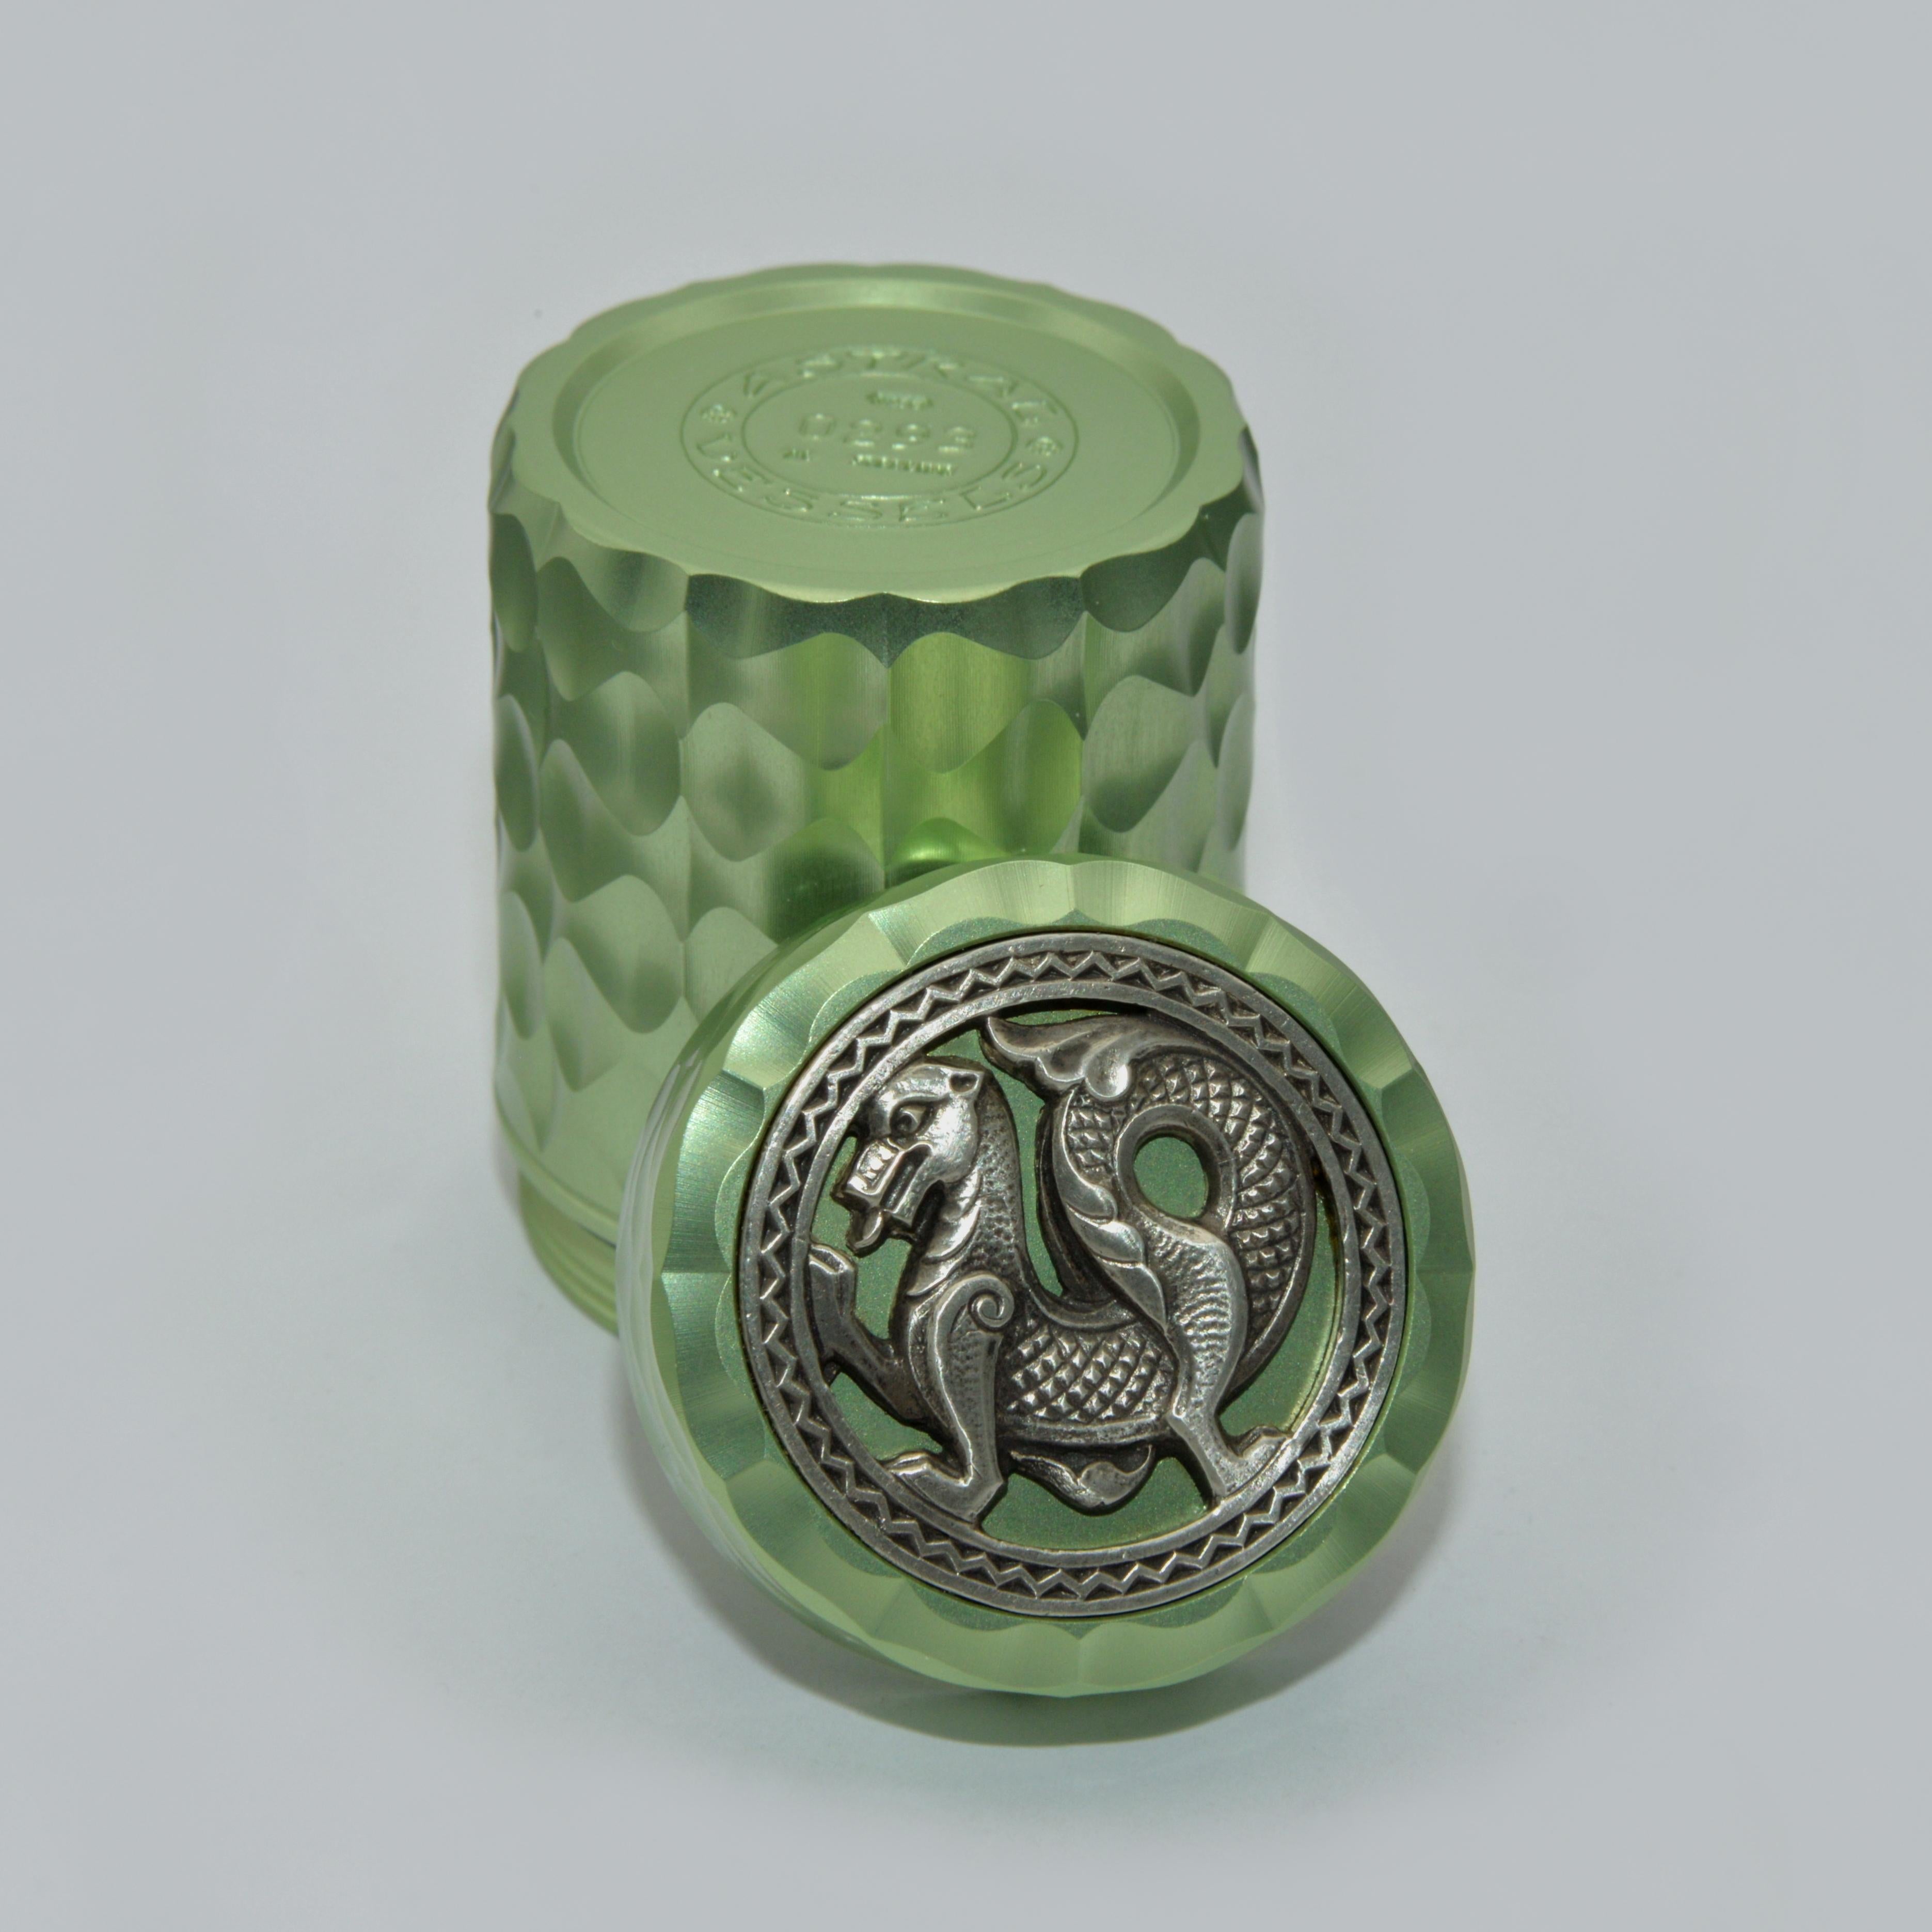 This vessel features a single, fabulous ornamental pattern that was carved onto nearly every surface using our antique Rose Engine. 
 
The Sterling Silver and rustic Welsh Dragon medallion was cast from an original carved in relief by James